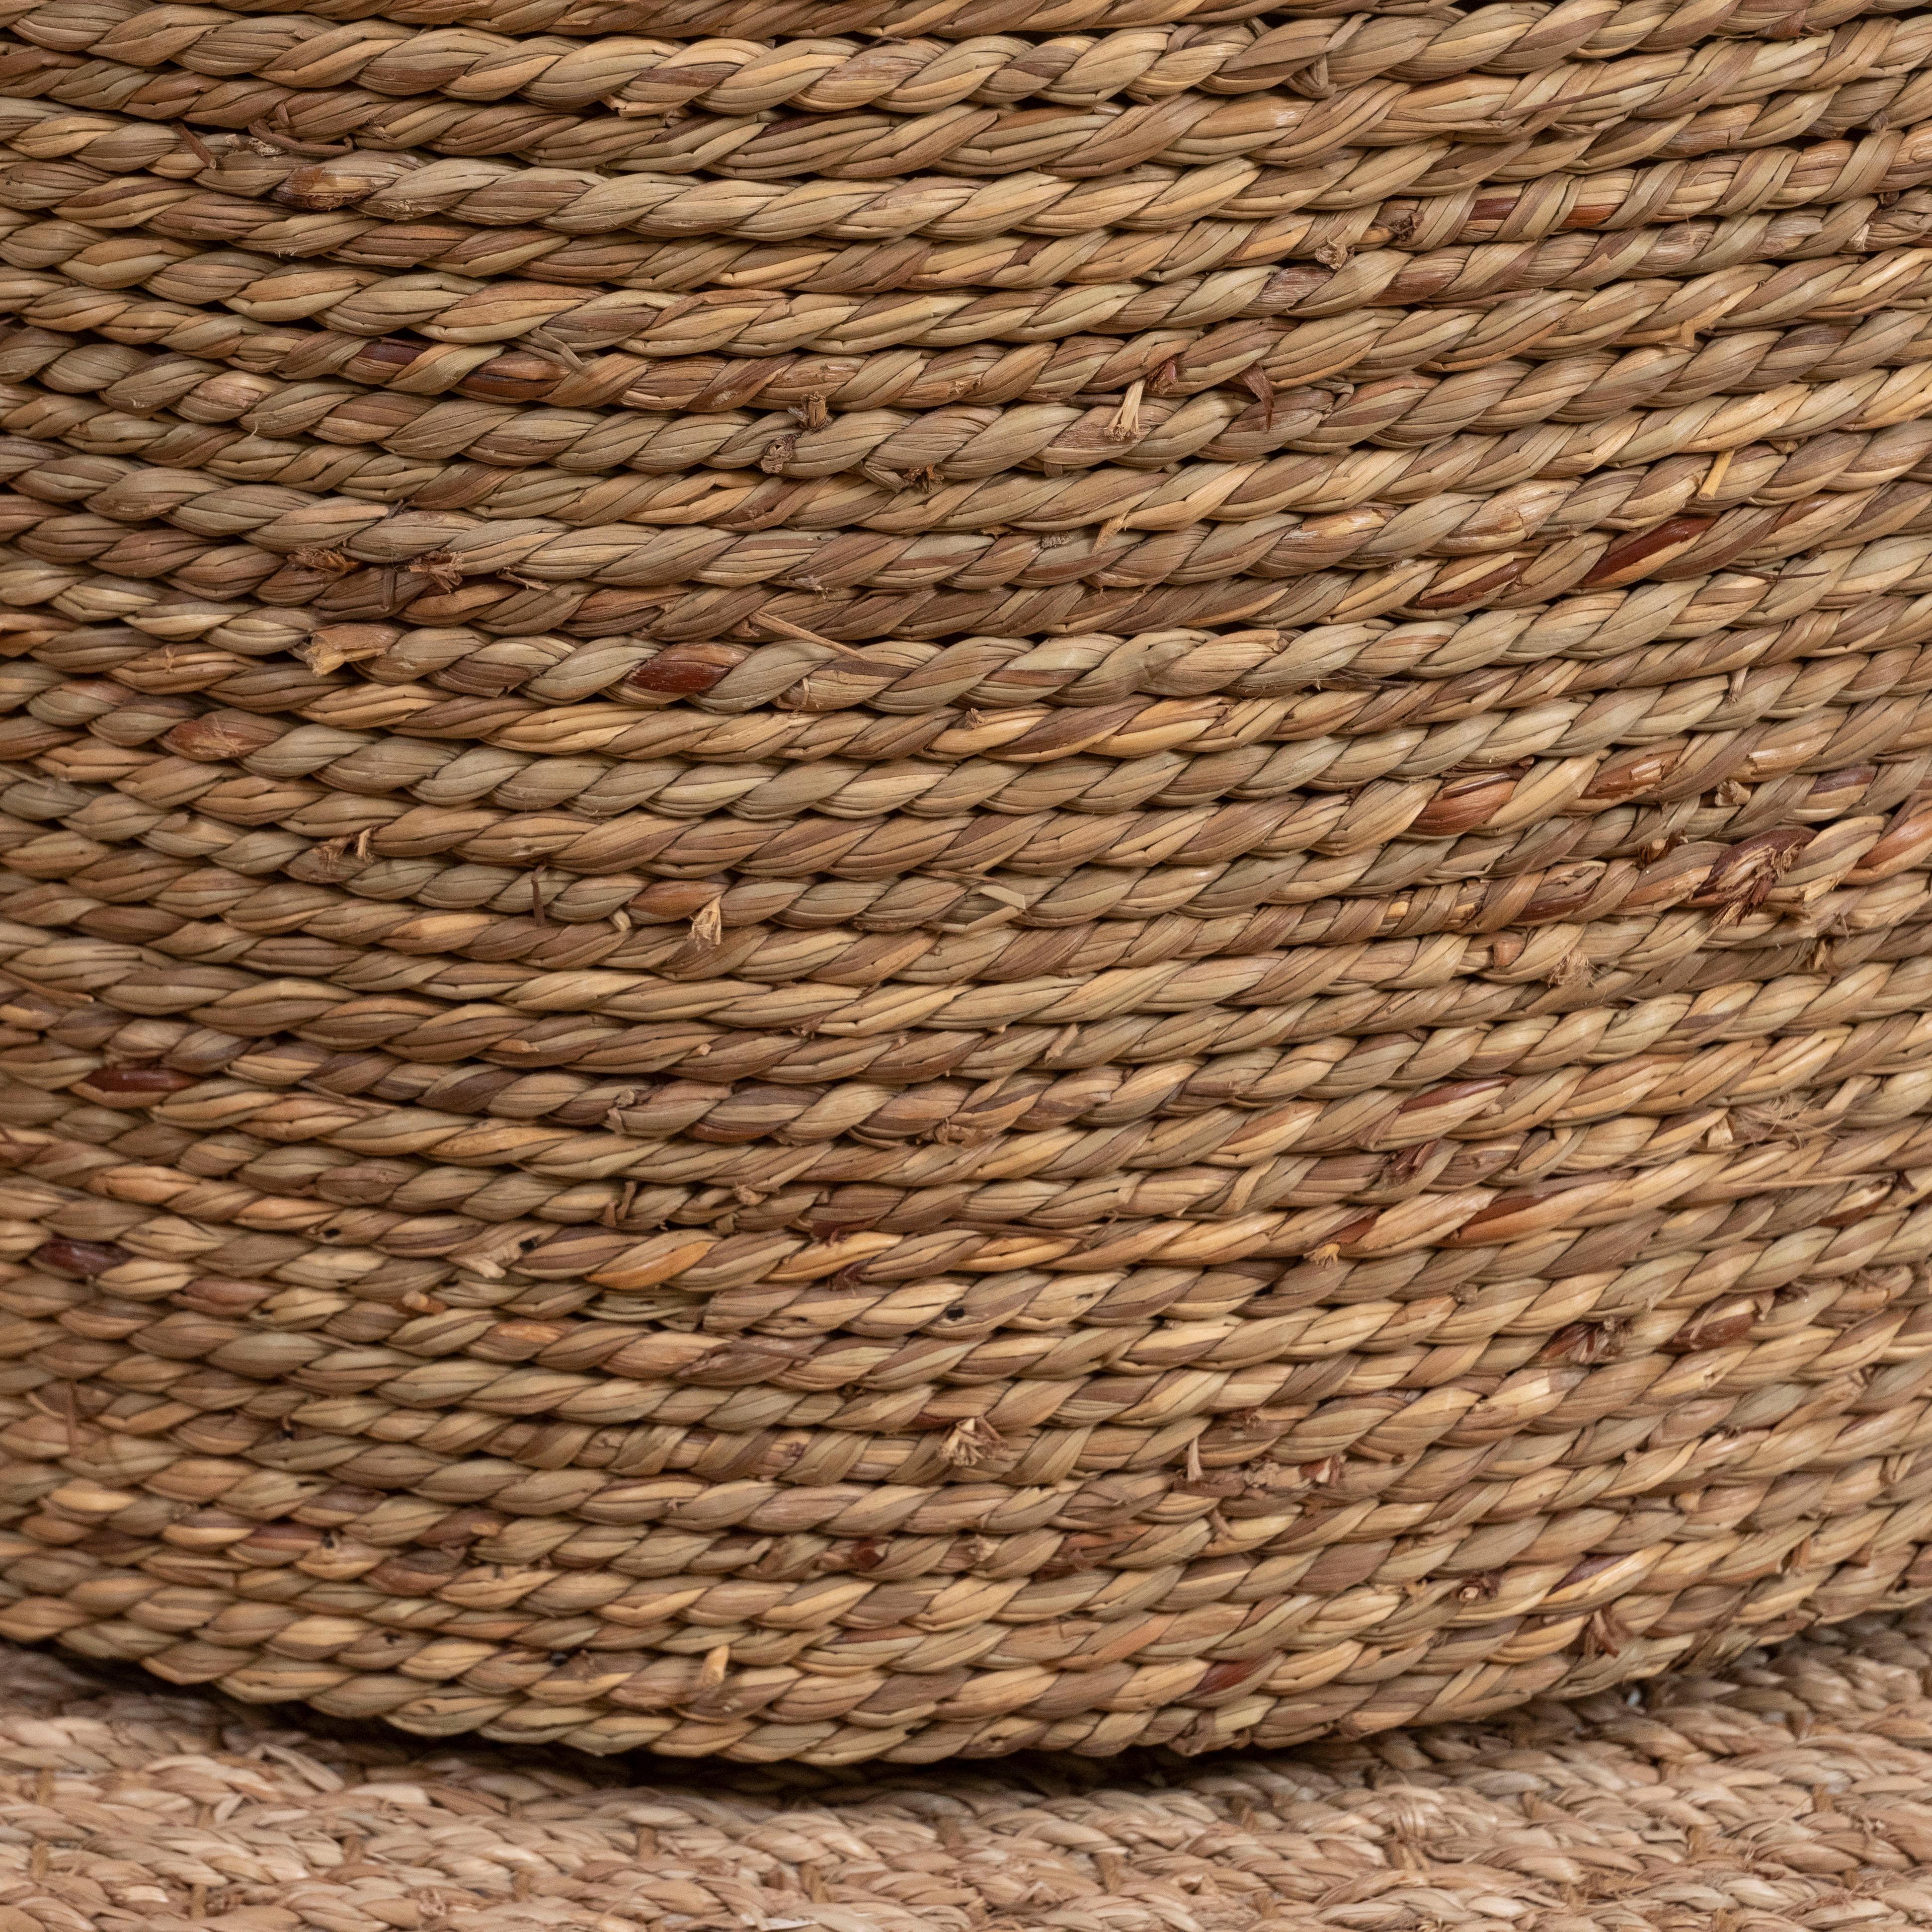 A perfect little accent piece, this round rattan table has a glass top. Great for a beach house or casual family room.